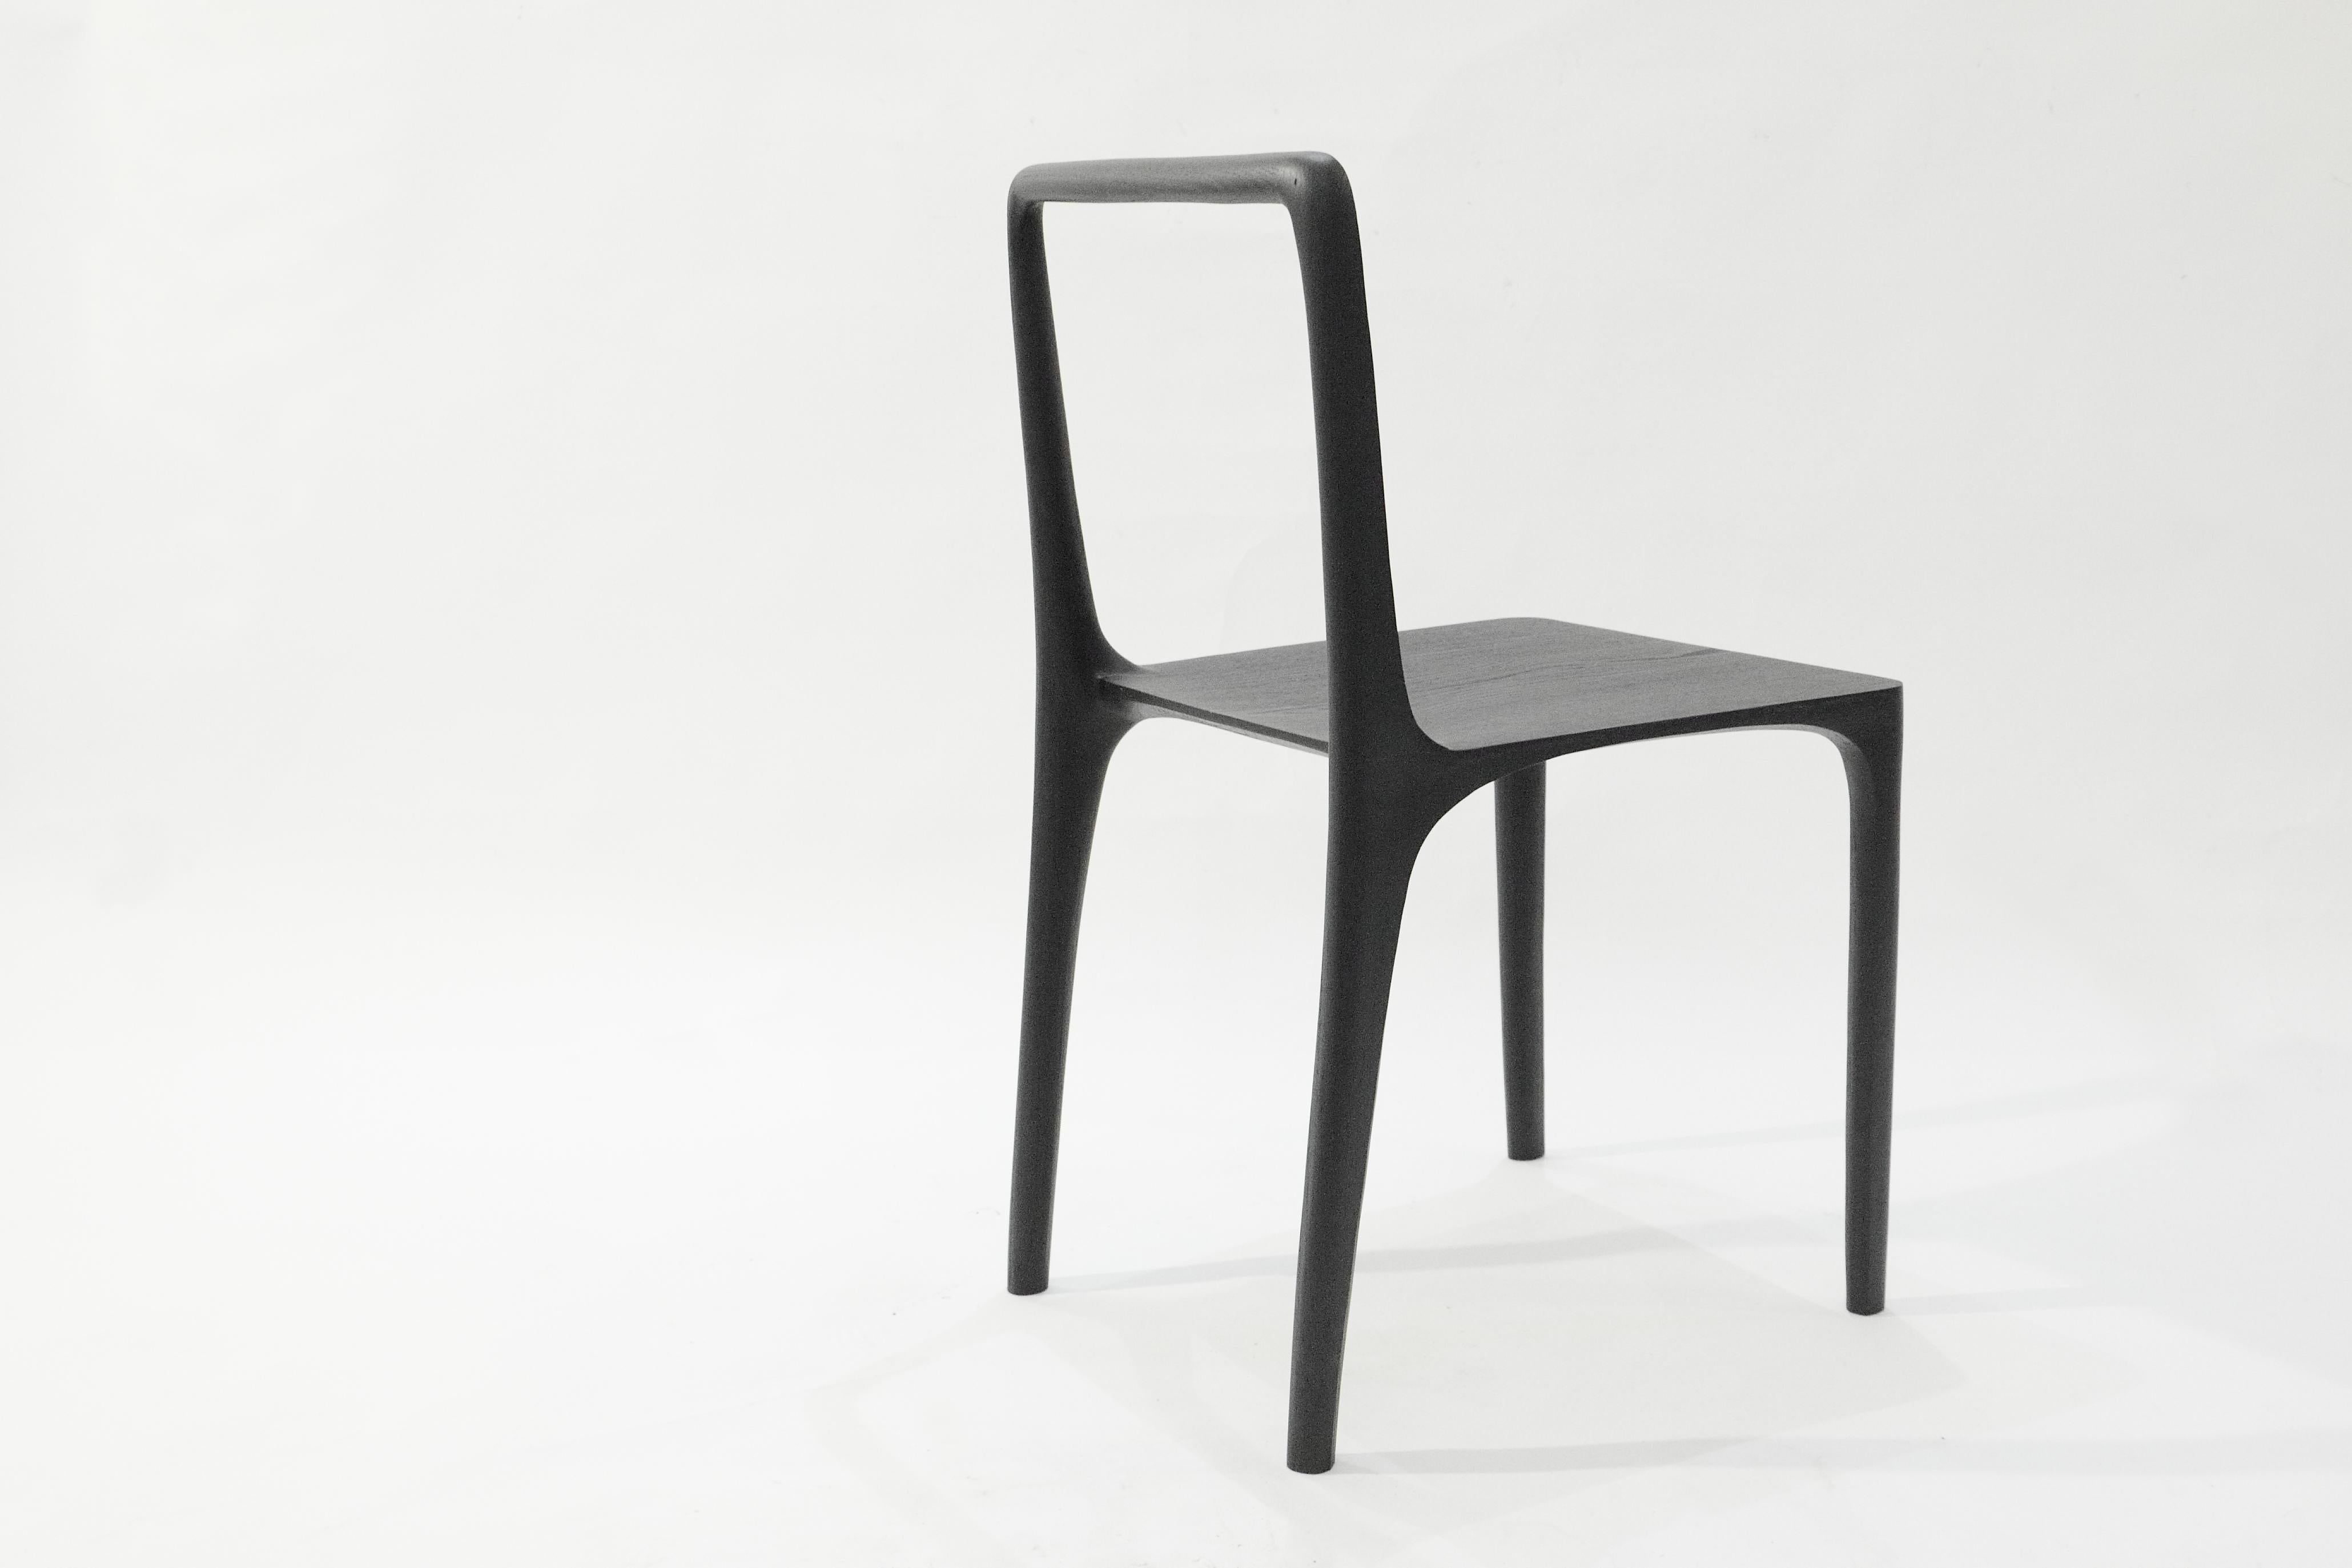 Dot chair, hand-sculpted and signed by Cedric Breisacher
Hand-sculpted and signed by Cedric Breisacher
Dimension: H 46/80 cm x P 44 cm x L42 cm
Solid oak
Can be made to order in other dimensions and finishes.

Designer-sculptor, Cedric